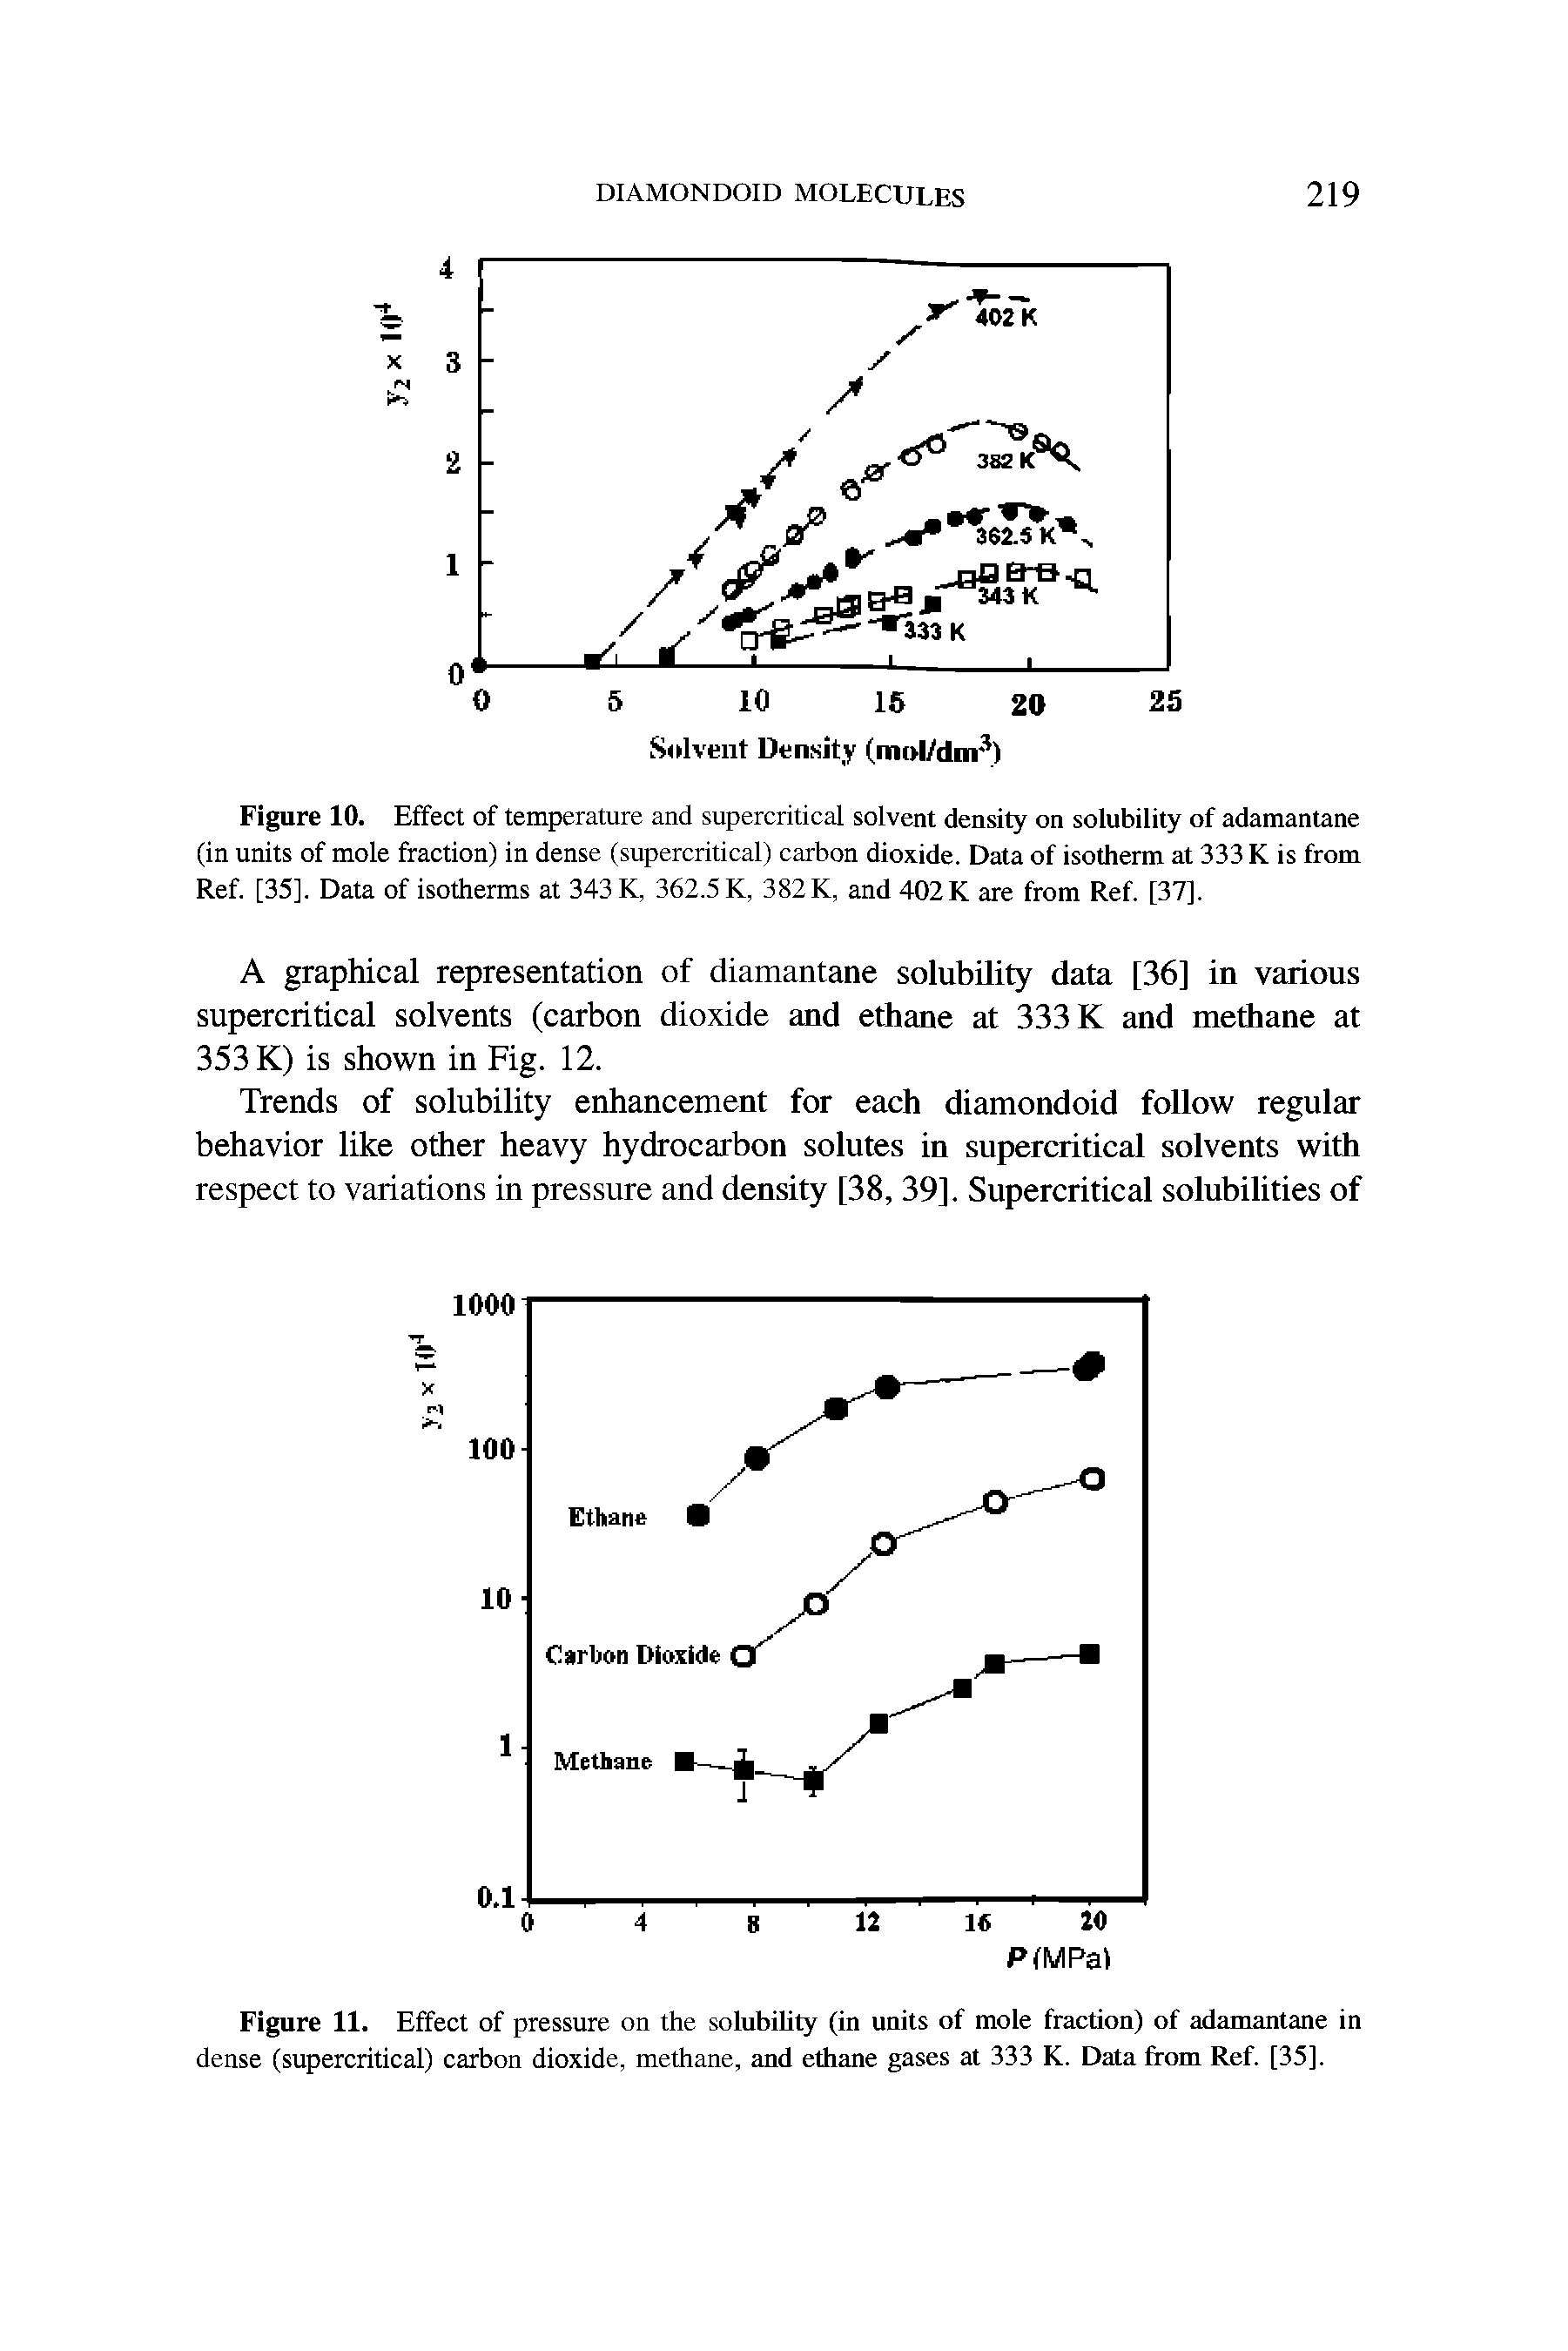 Figure 10. Effect of temperature and supercritical solvent density on solubility of adamantane (in units of mole fraction) in dense (supercritical) carbon dioxide. Data of isotherm at 333 K is from Ref. [35]. Data of isotherms at 343 K, 362.5 K, 382 K, and 402 K are from Ref. [37].